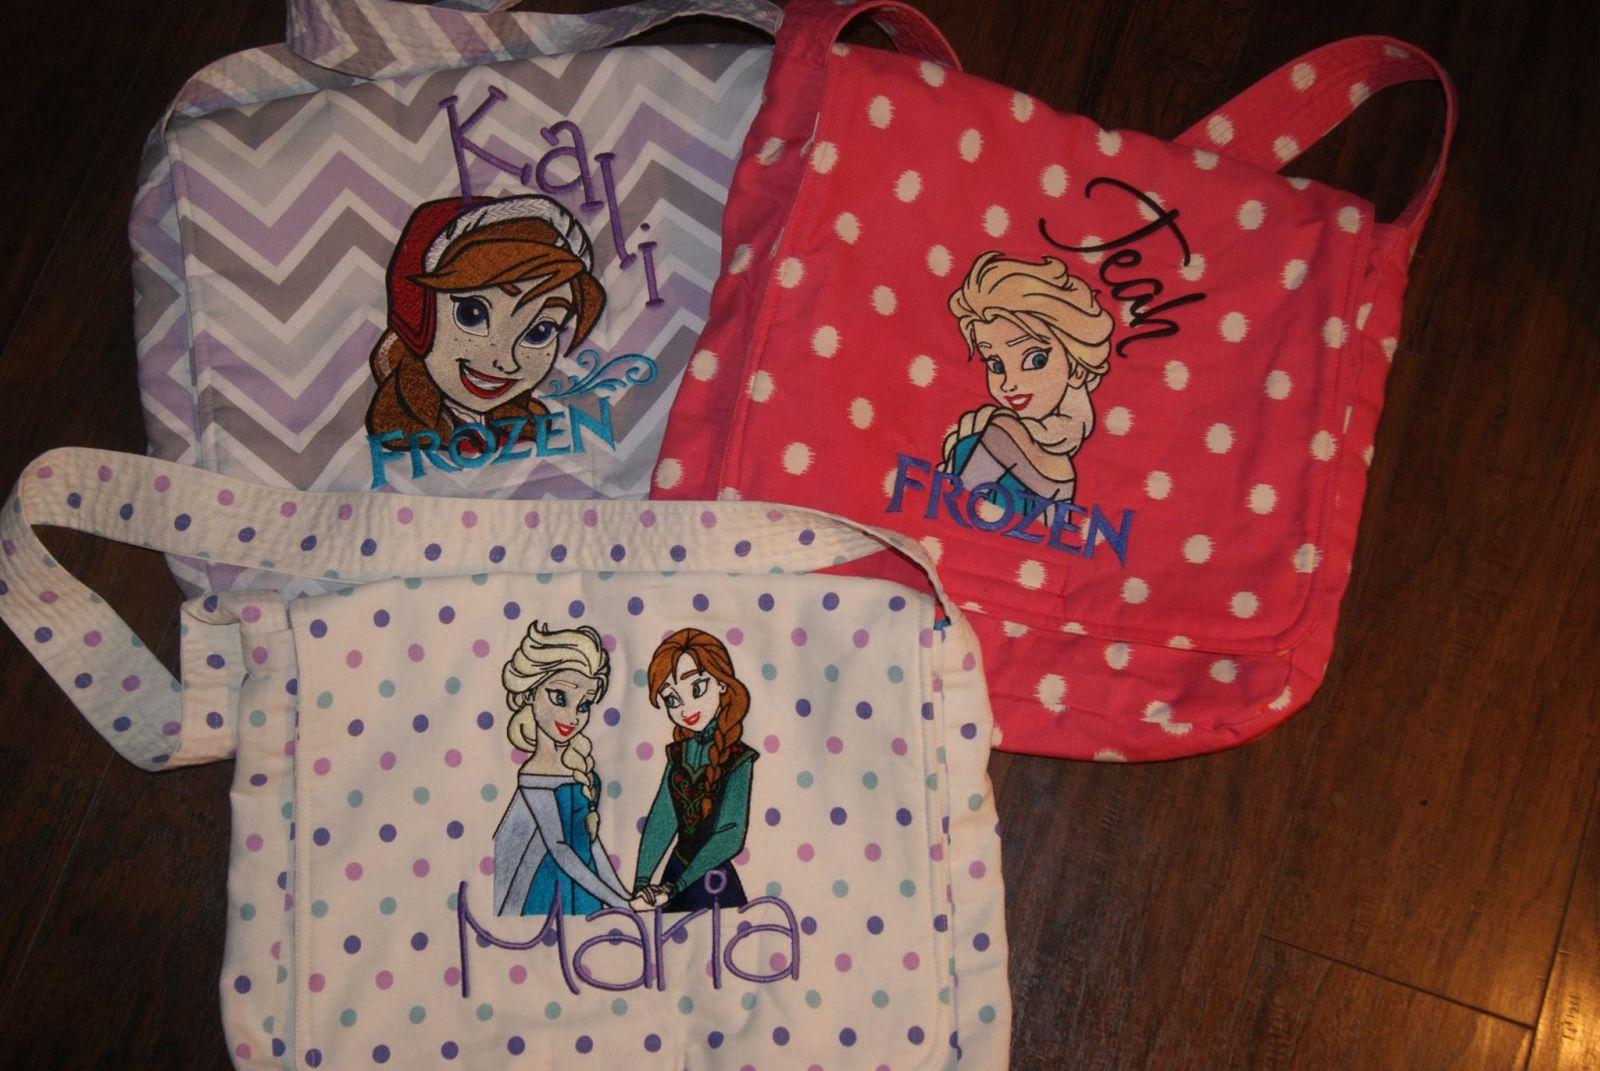 Embroidered Bag with Frozen designs